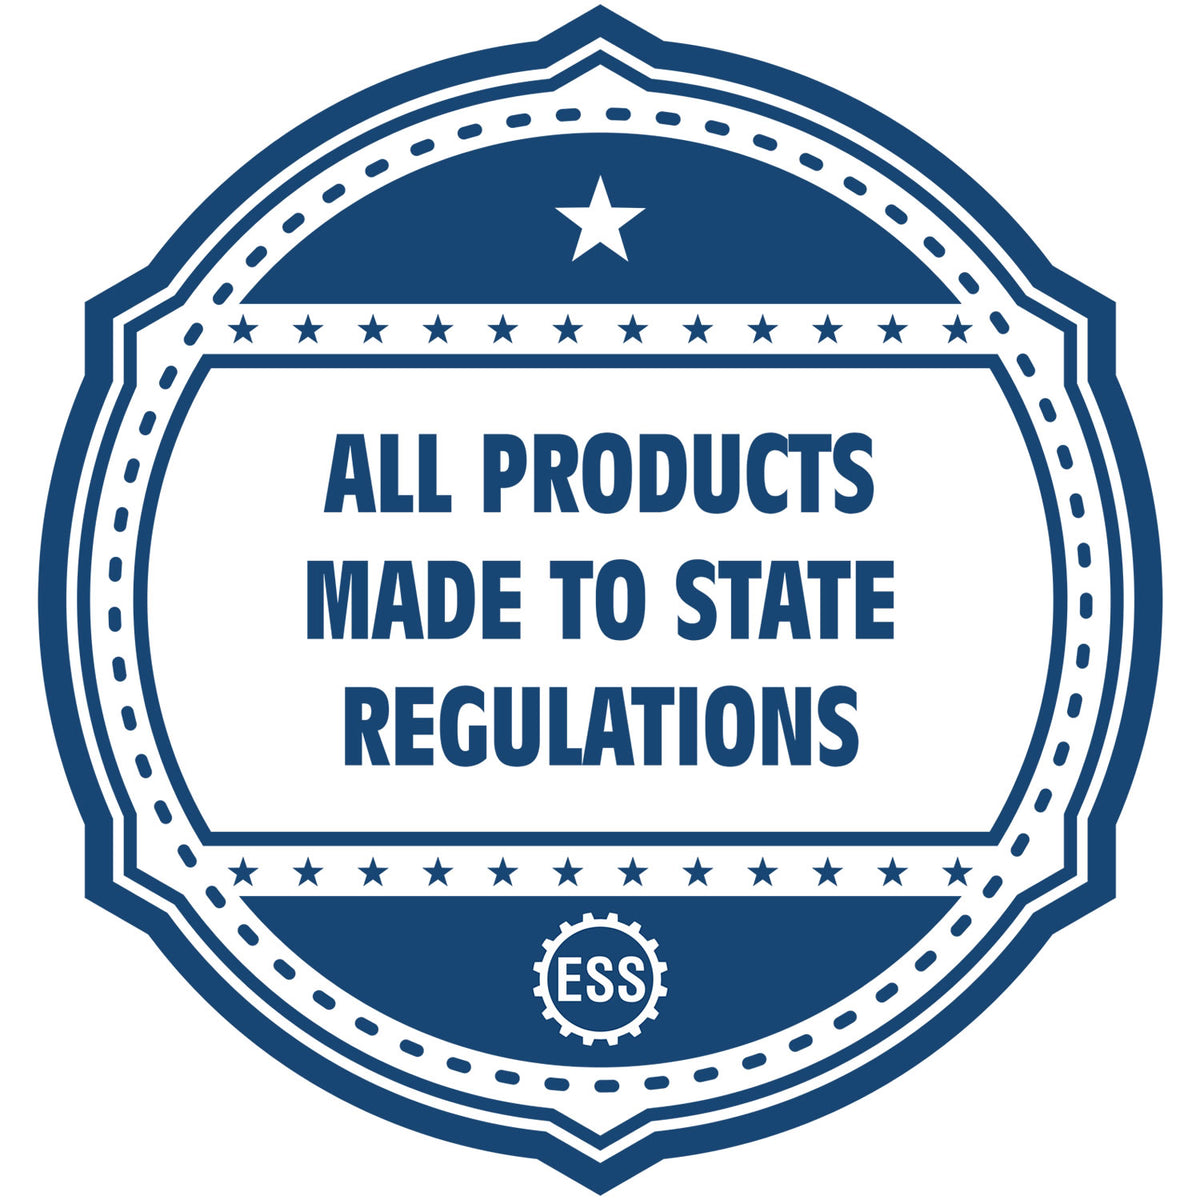 An icon or badge element for the Heavy Duty Cast Iron Arizona Engineer Seal Embosser showing that this product is made in compliance with state regulations.